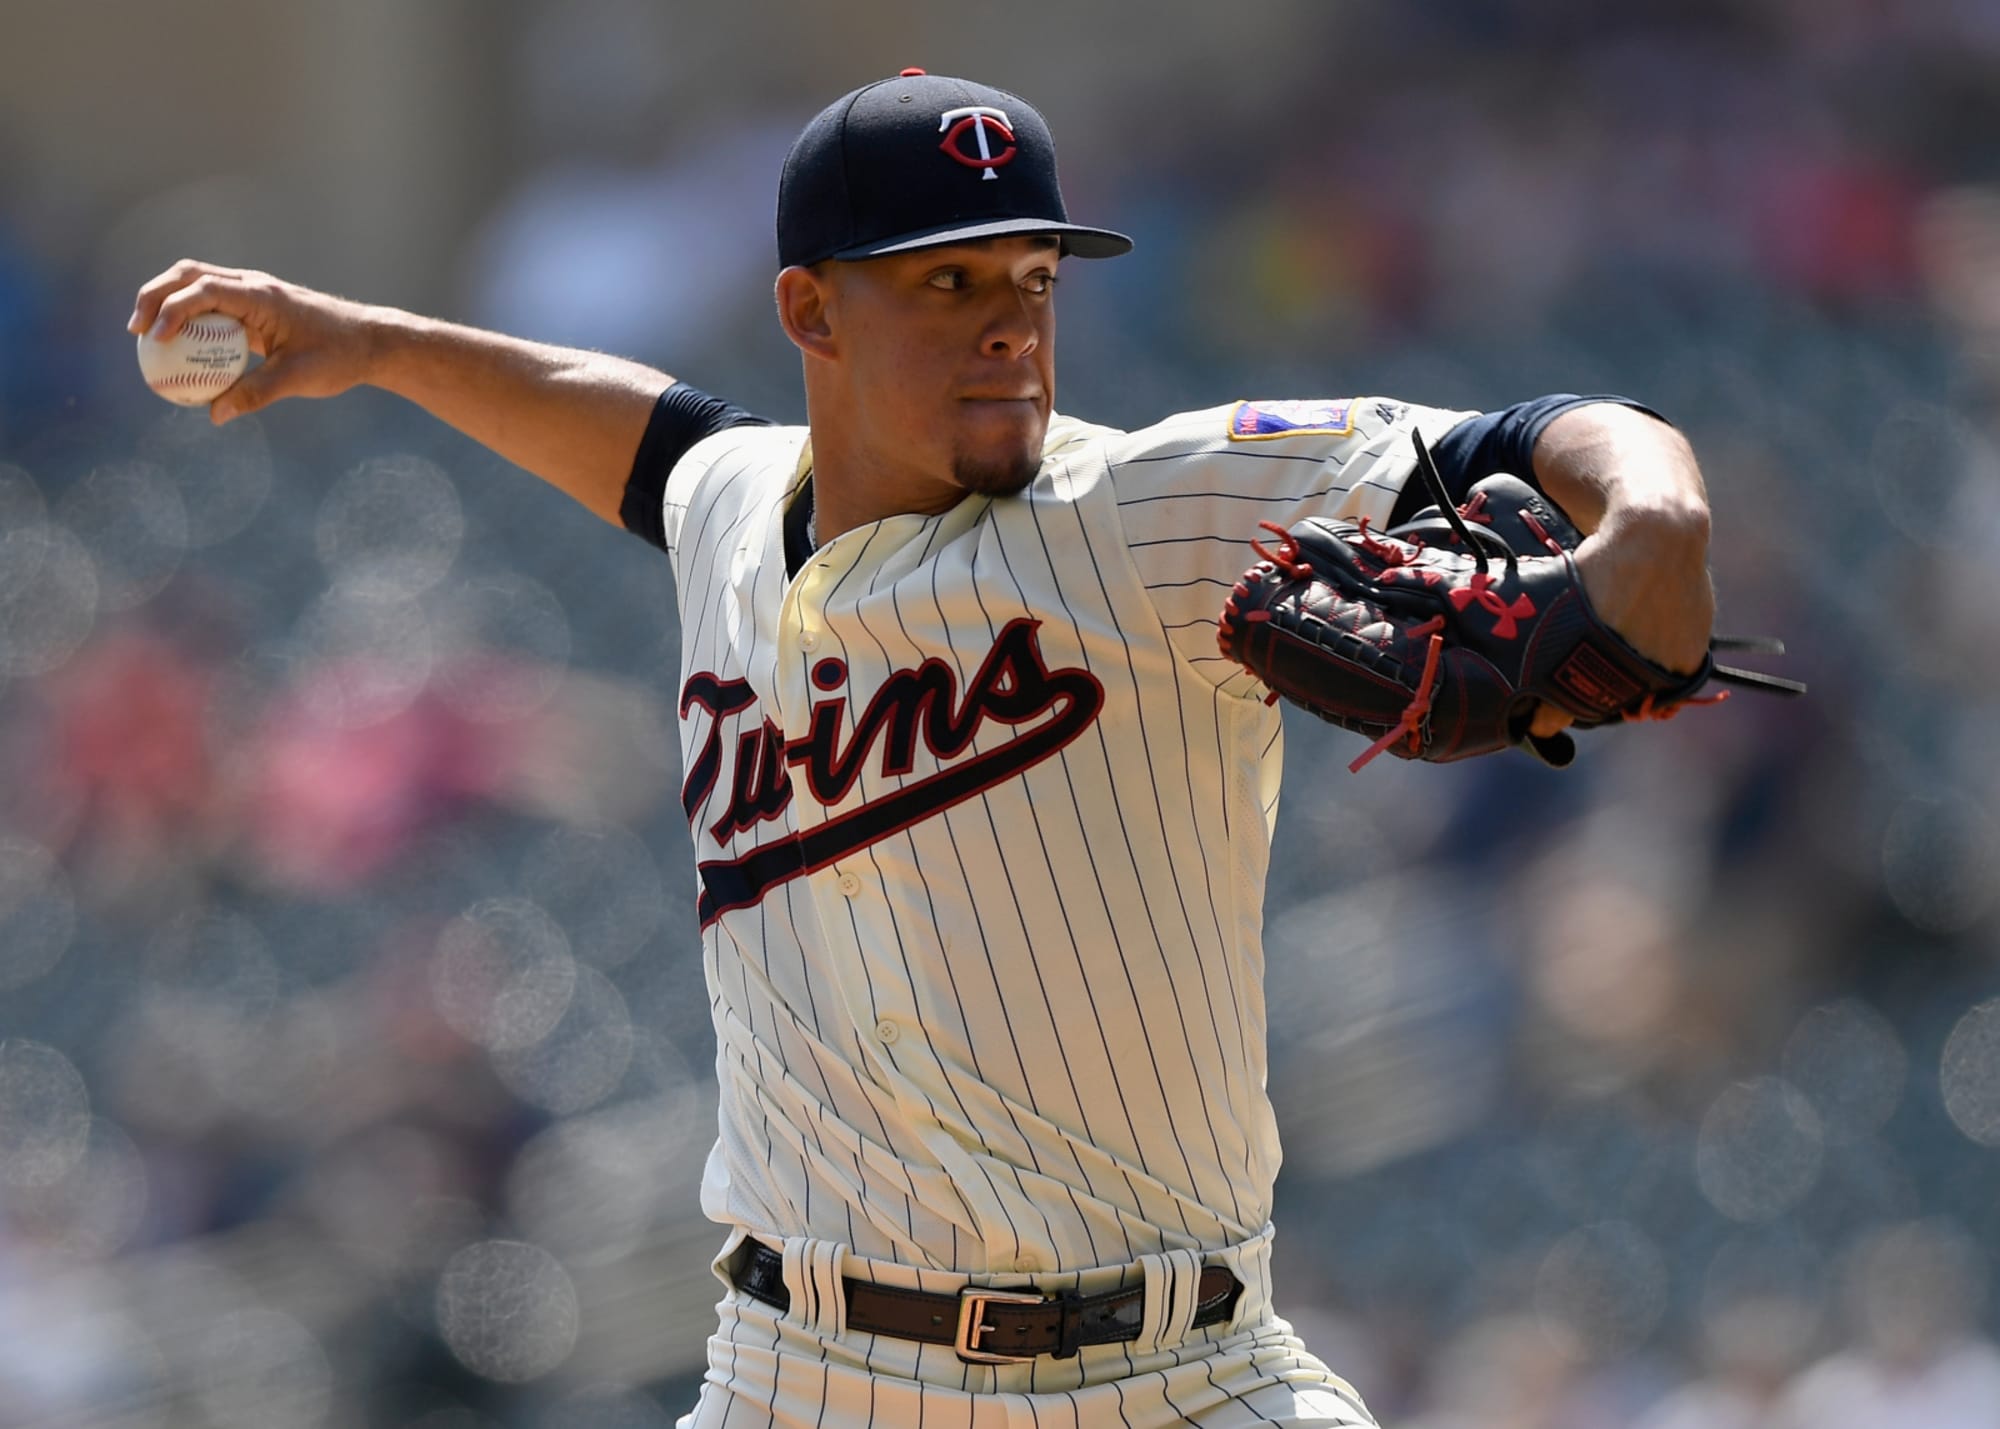 Minnesota Twins The future of the pitching staff looks bright